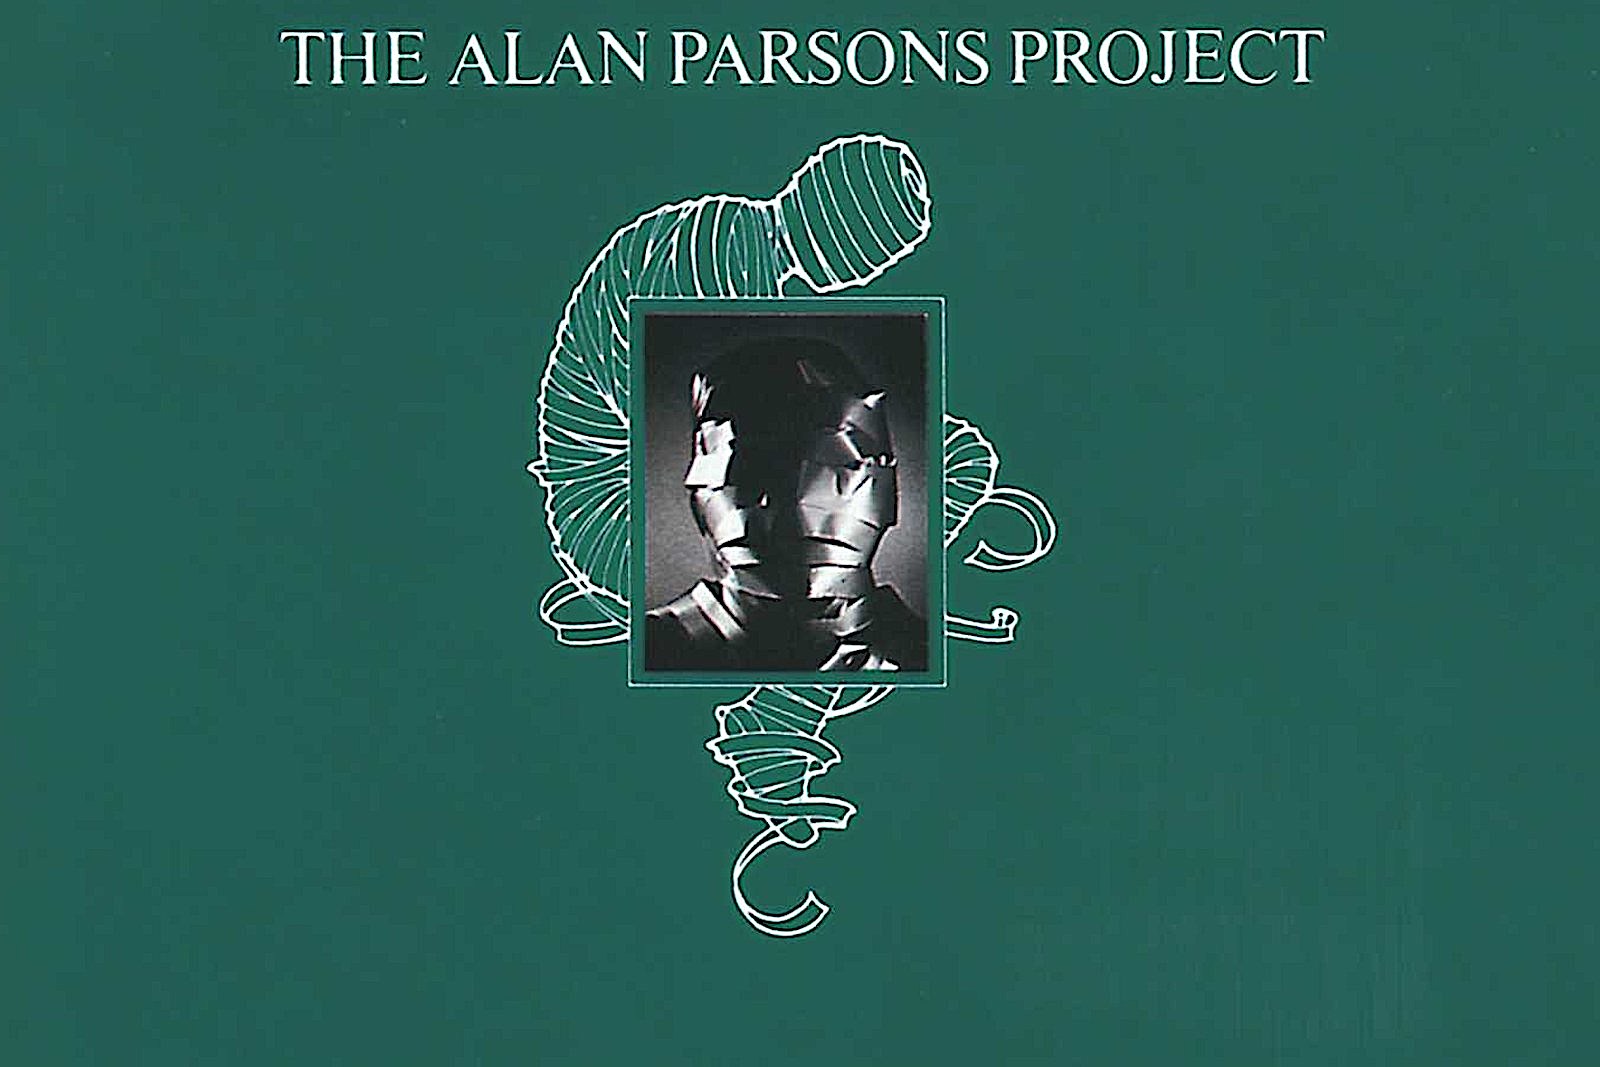 SPILL ALBUM REVIEW: ALAN PARSONS - FROM THE NEW WORLD - The Spill